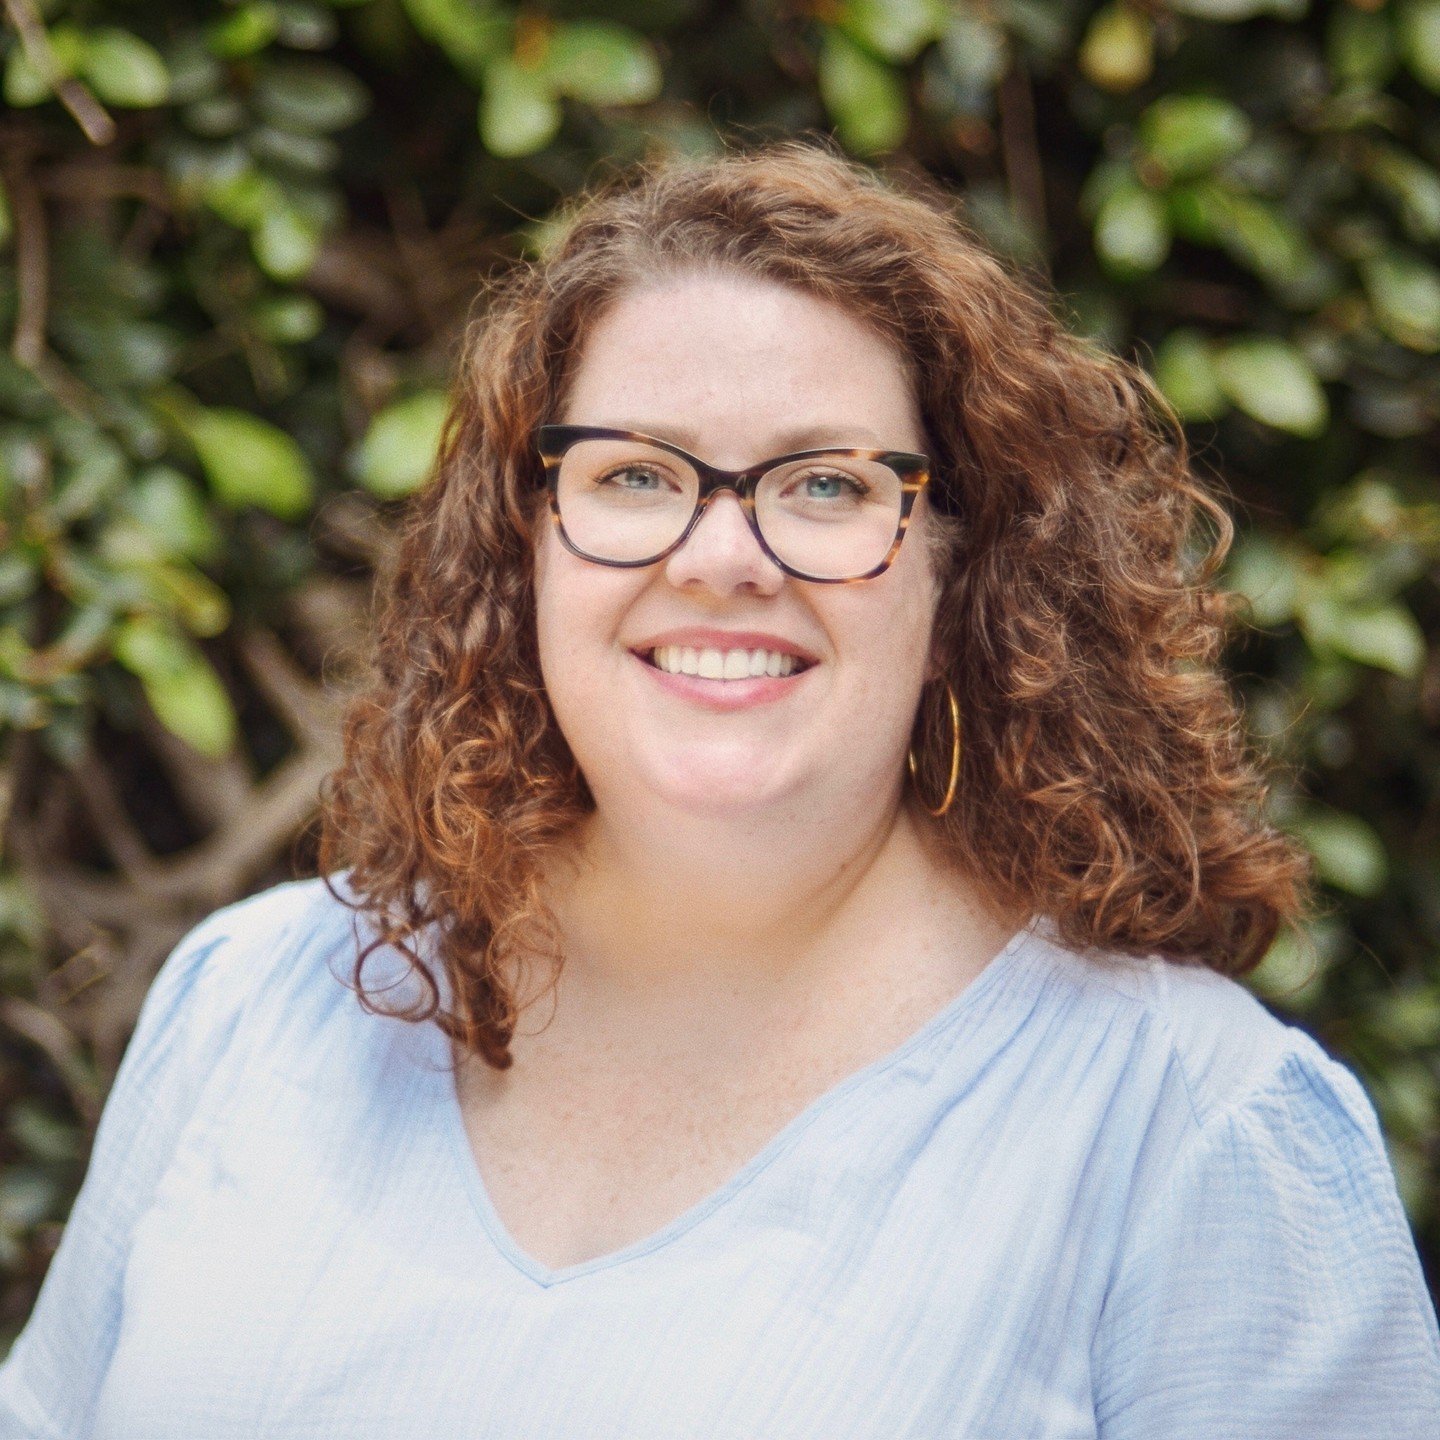 Happy Monday - meet the newest members of our team!

Anna Kerr spent 13 years teaching history in several different Texas public schools. Her teaching background and love for US history have made guiding tours in Charleston a bucket list job! Anna is